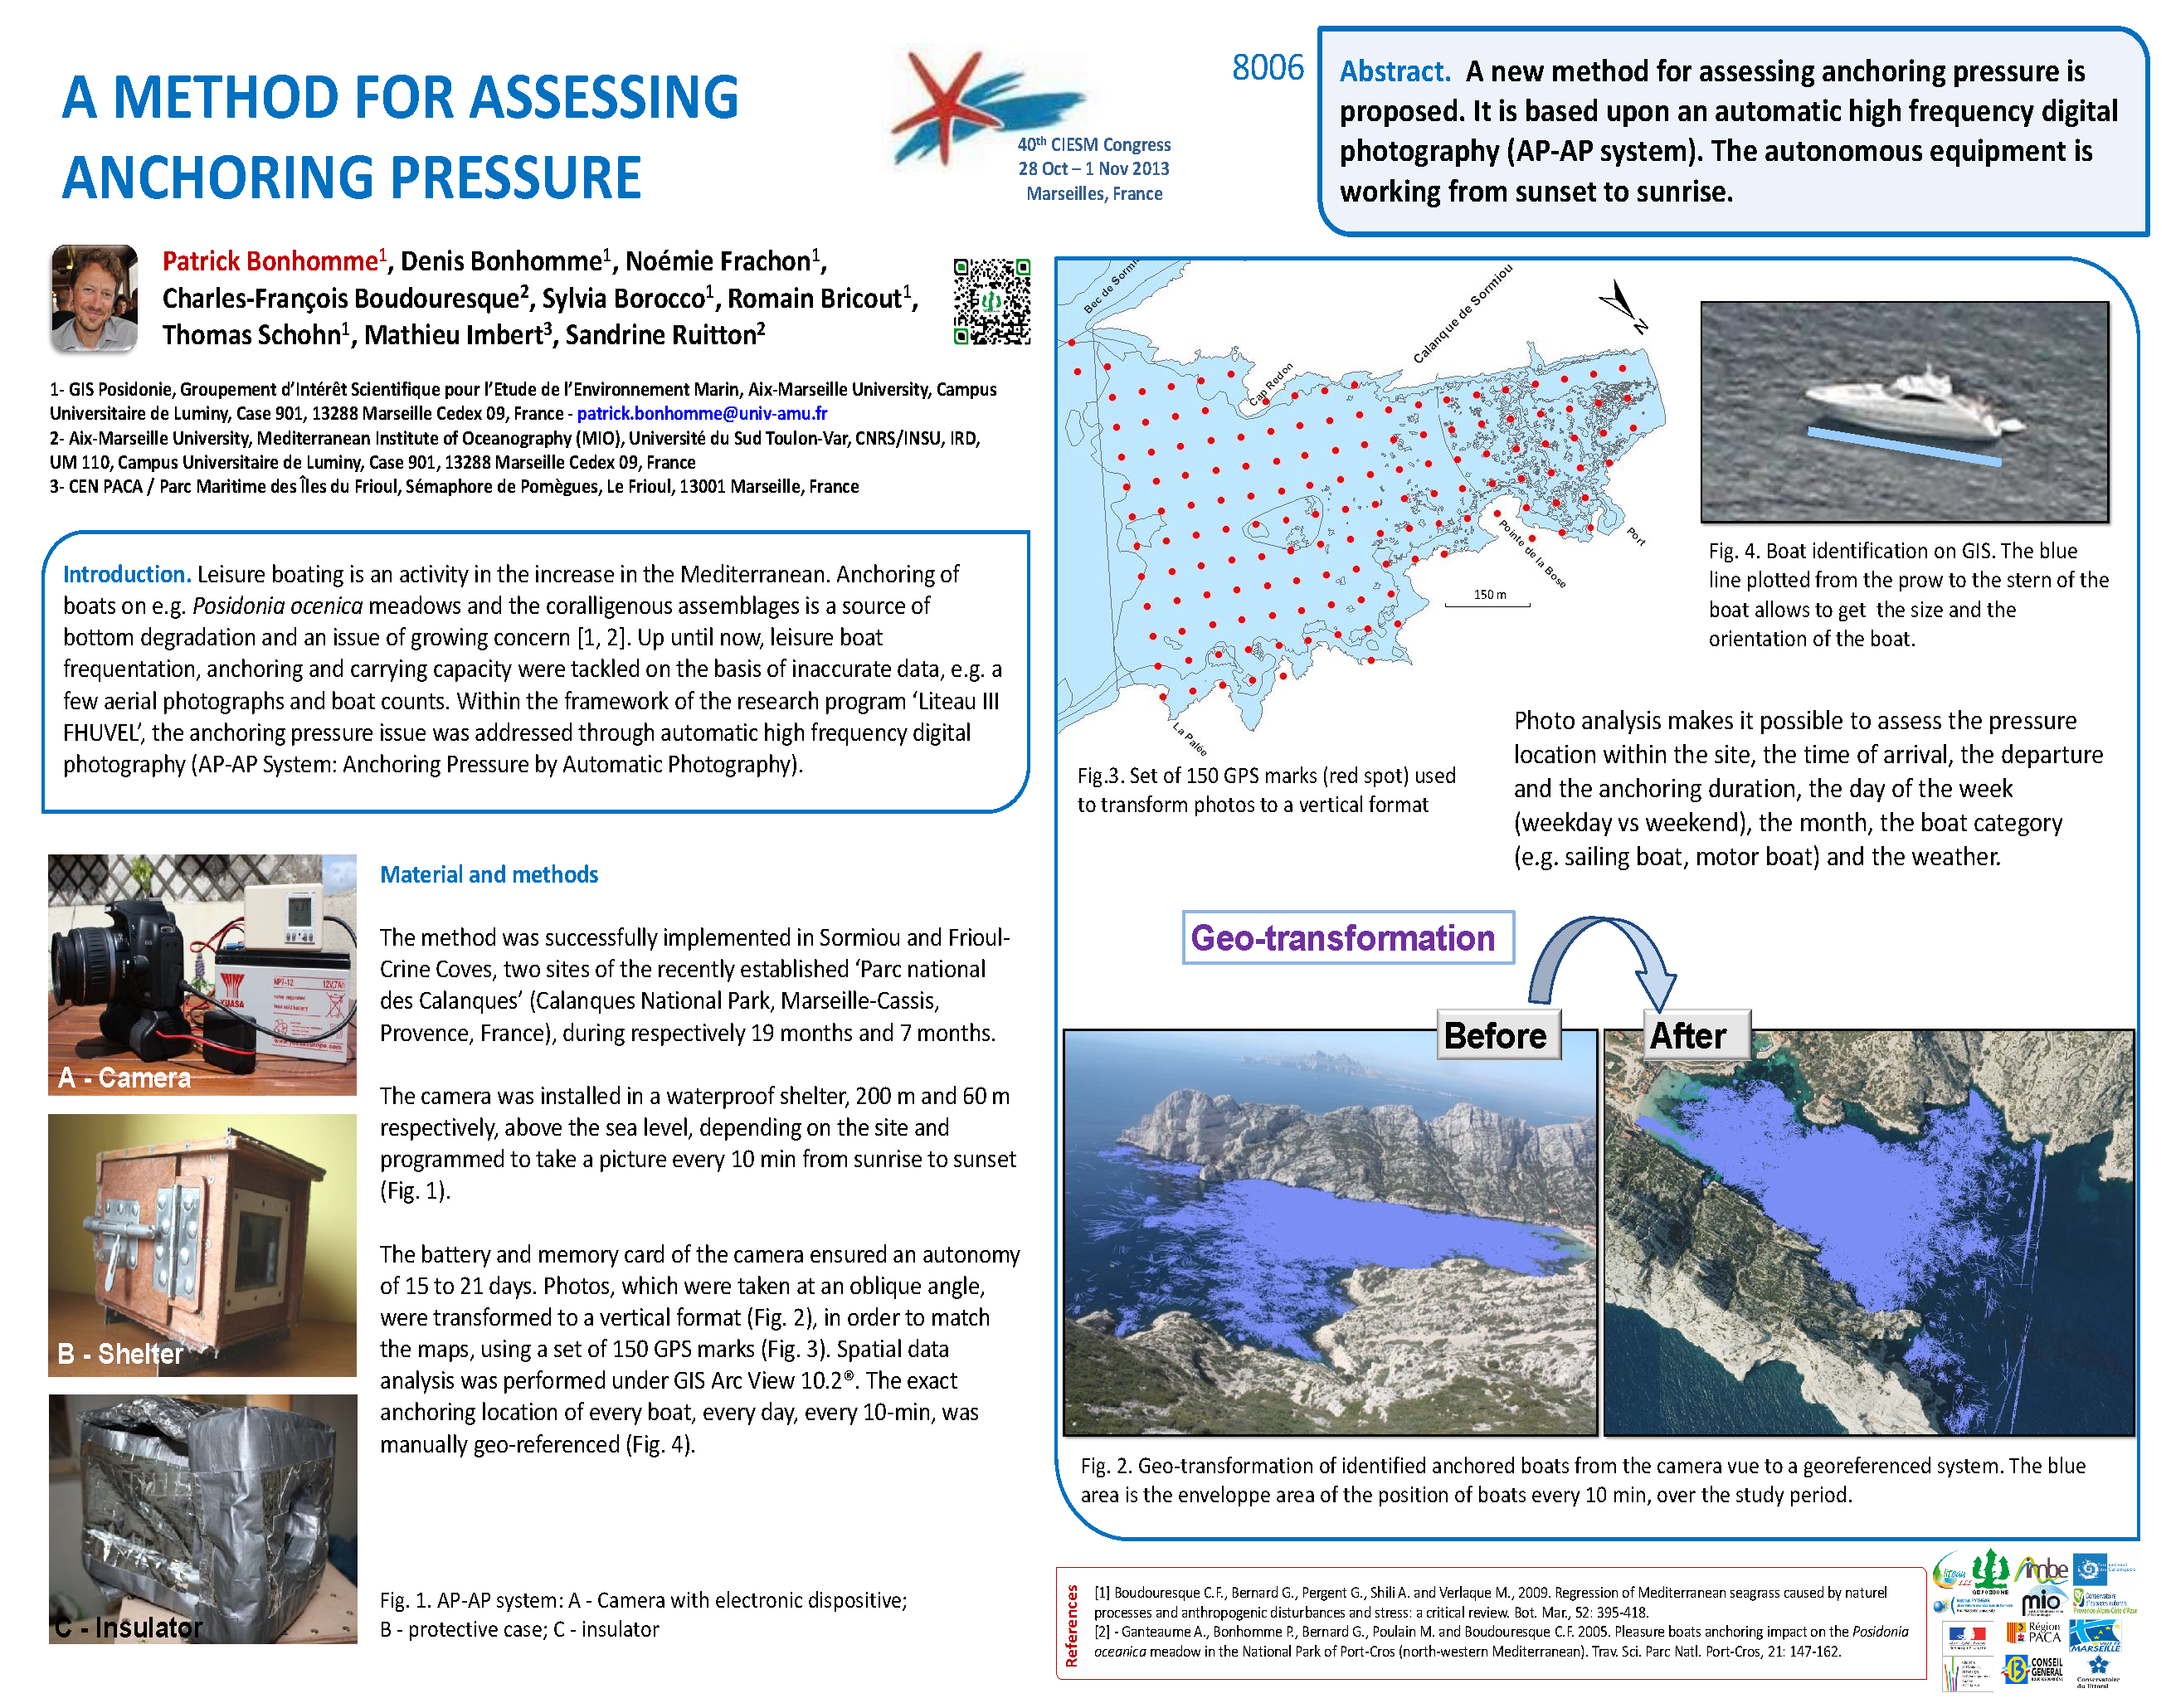 Bonhomme_al2013_A_method_for_assessing_anchoring_Poster